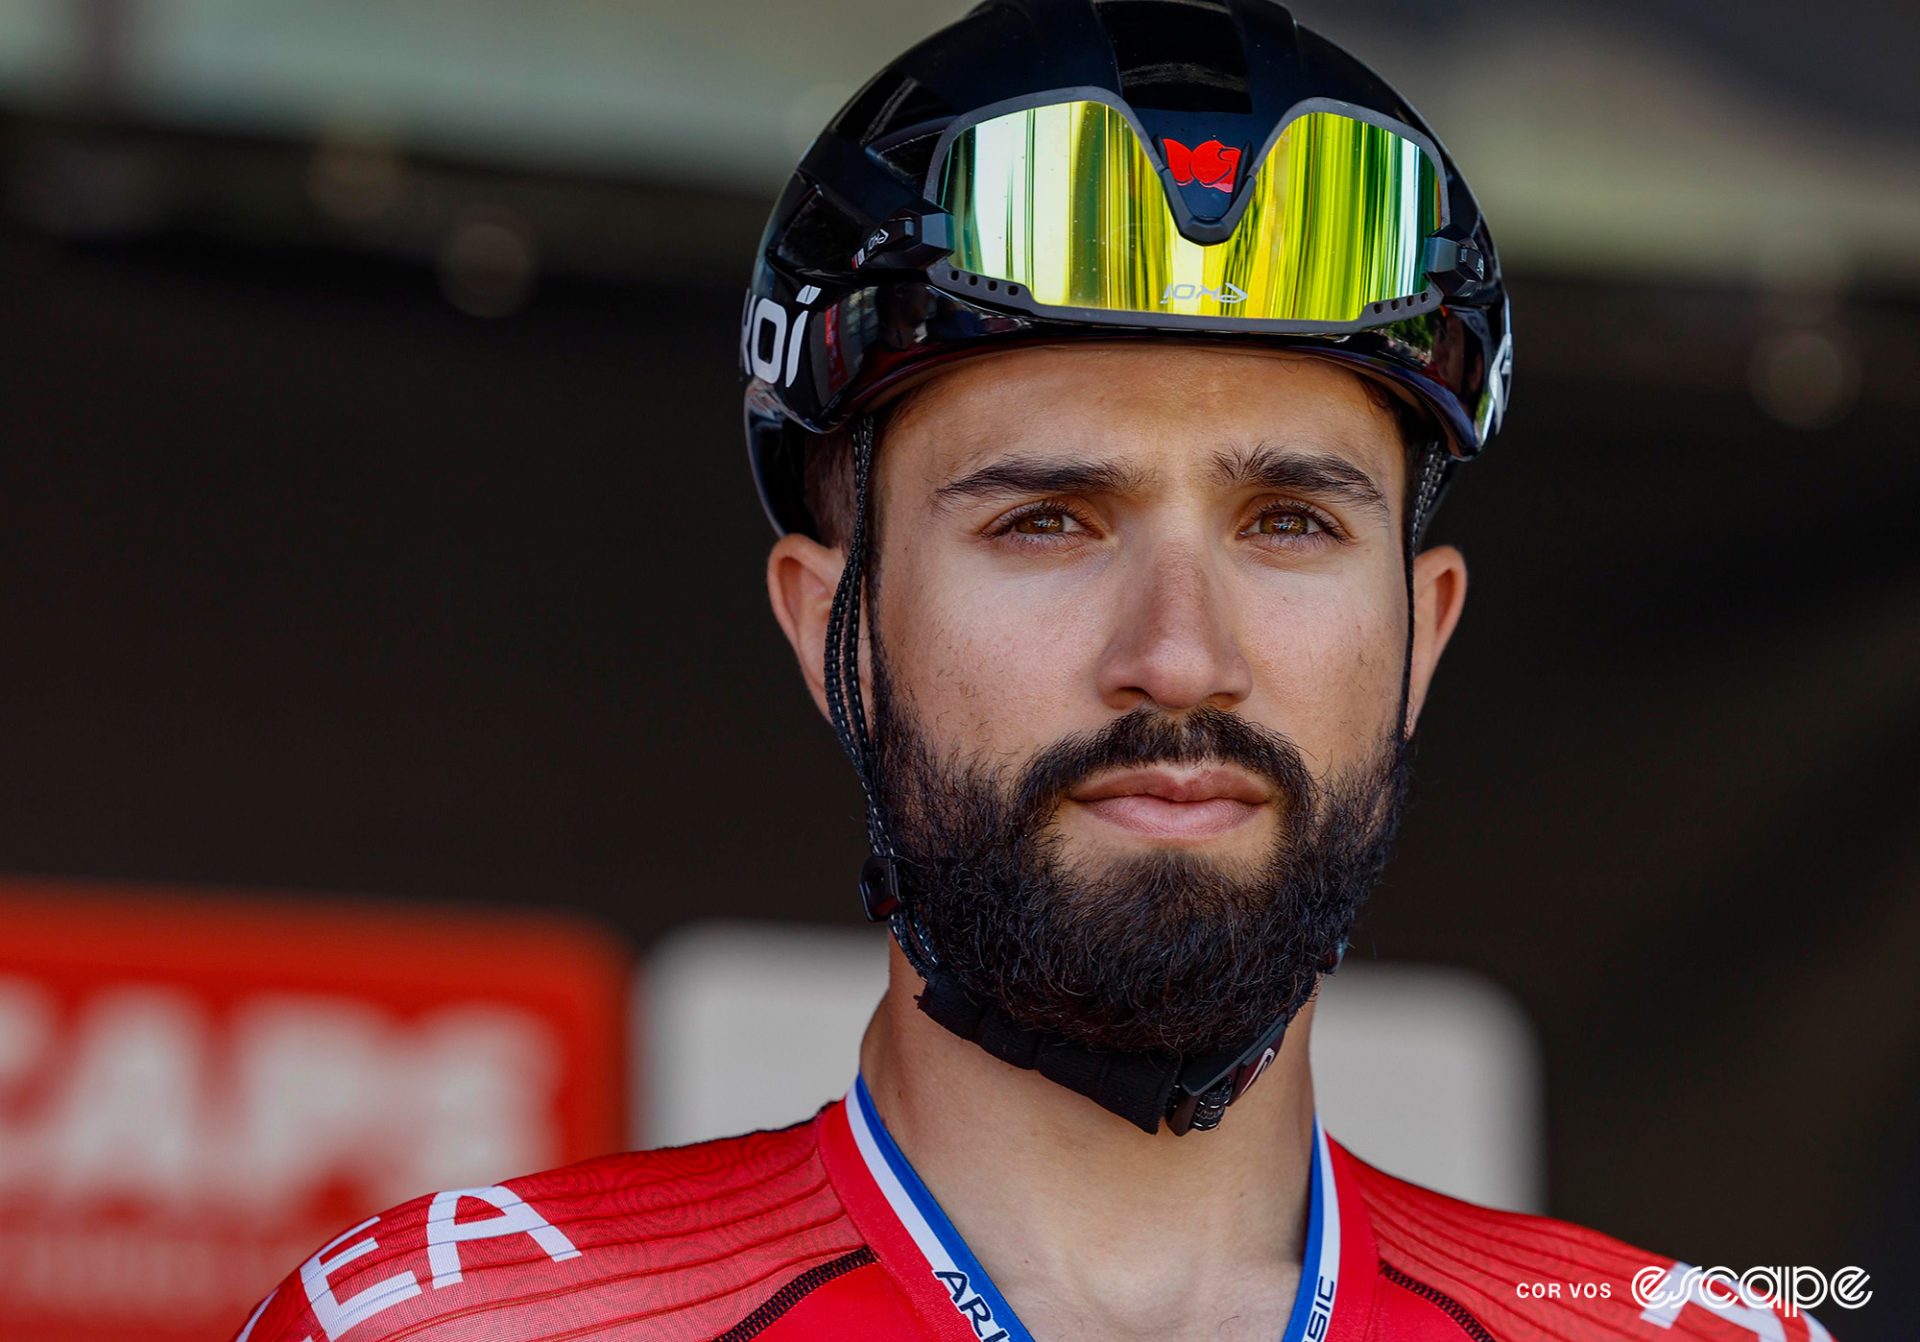 Nacer Bouhanni during the final year of his career.